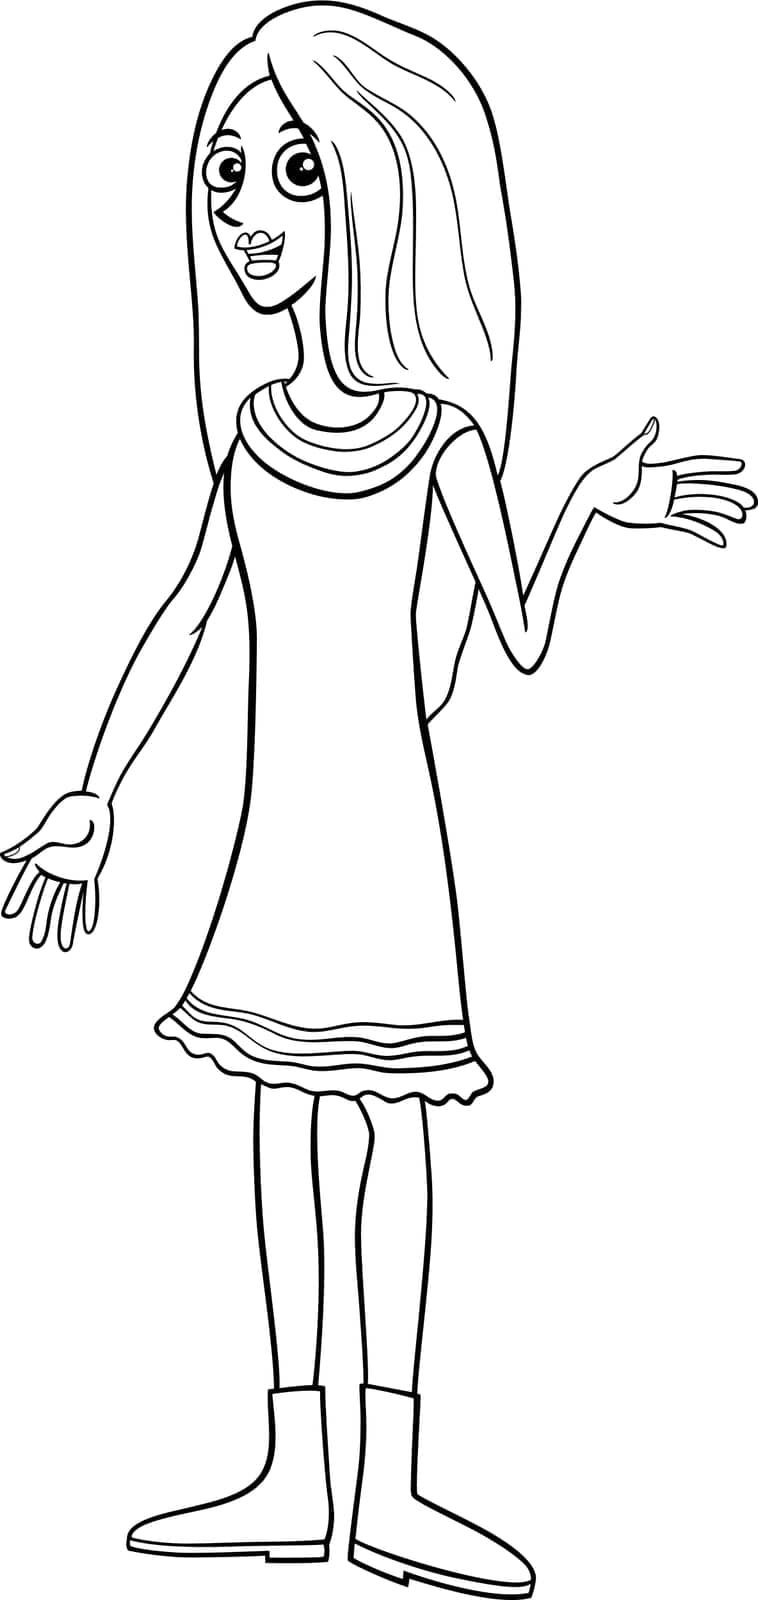 Cartoon illustration of funny girl or young woman comic character coloring page